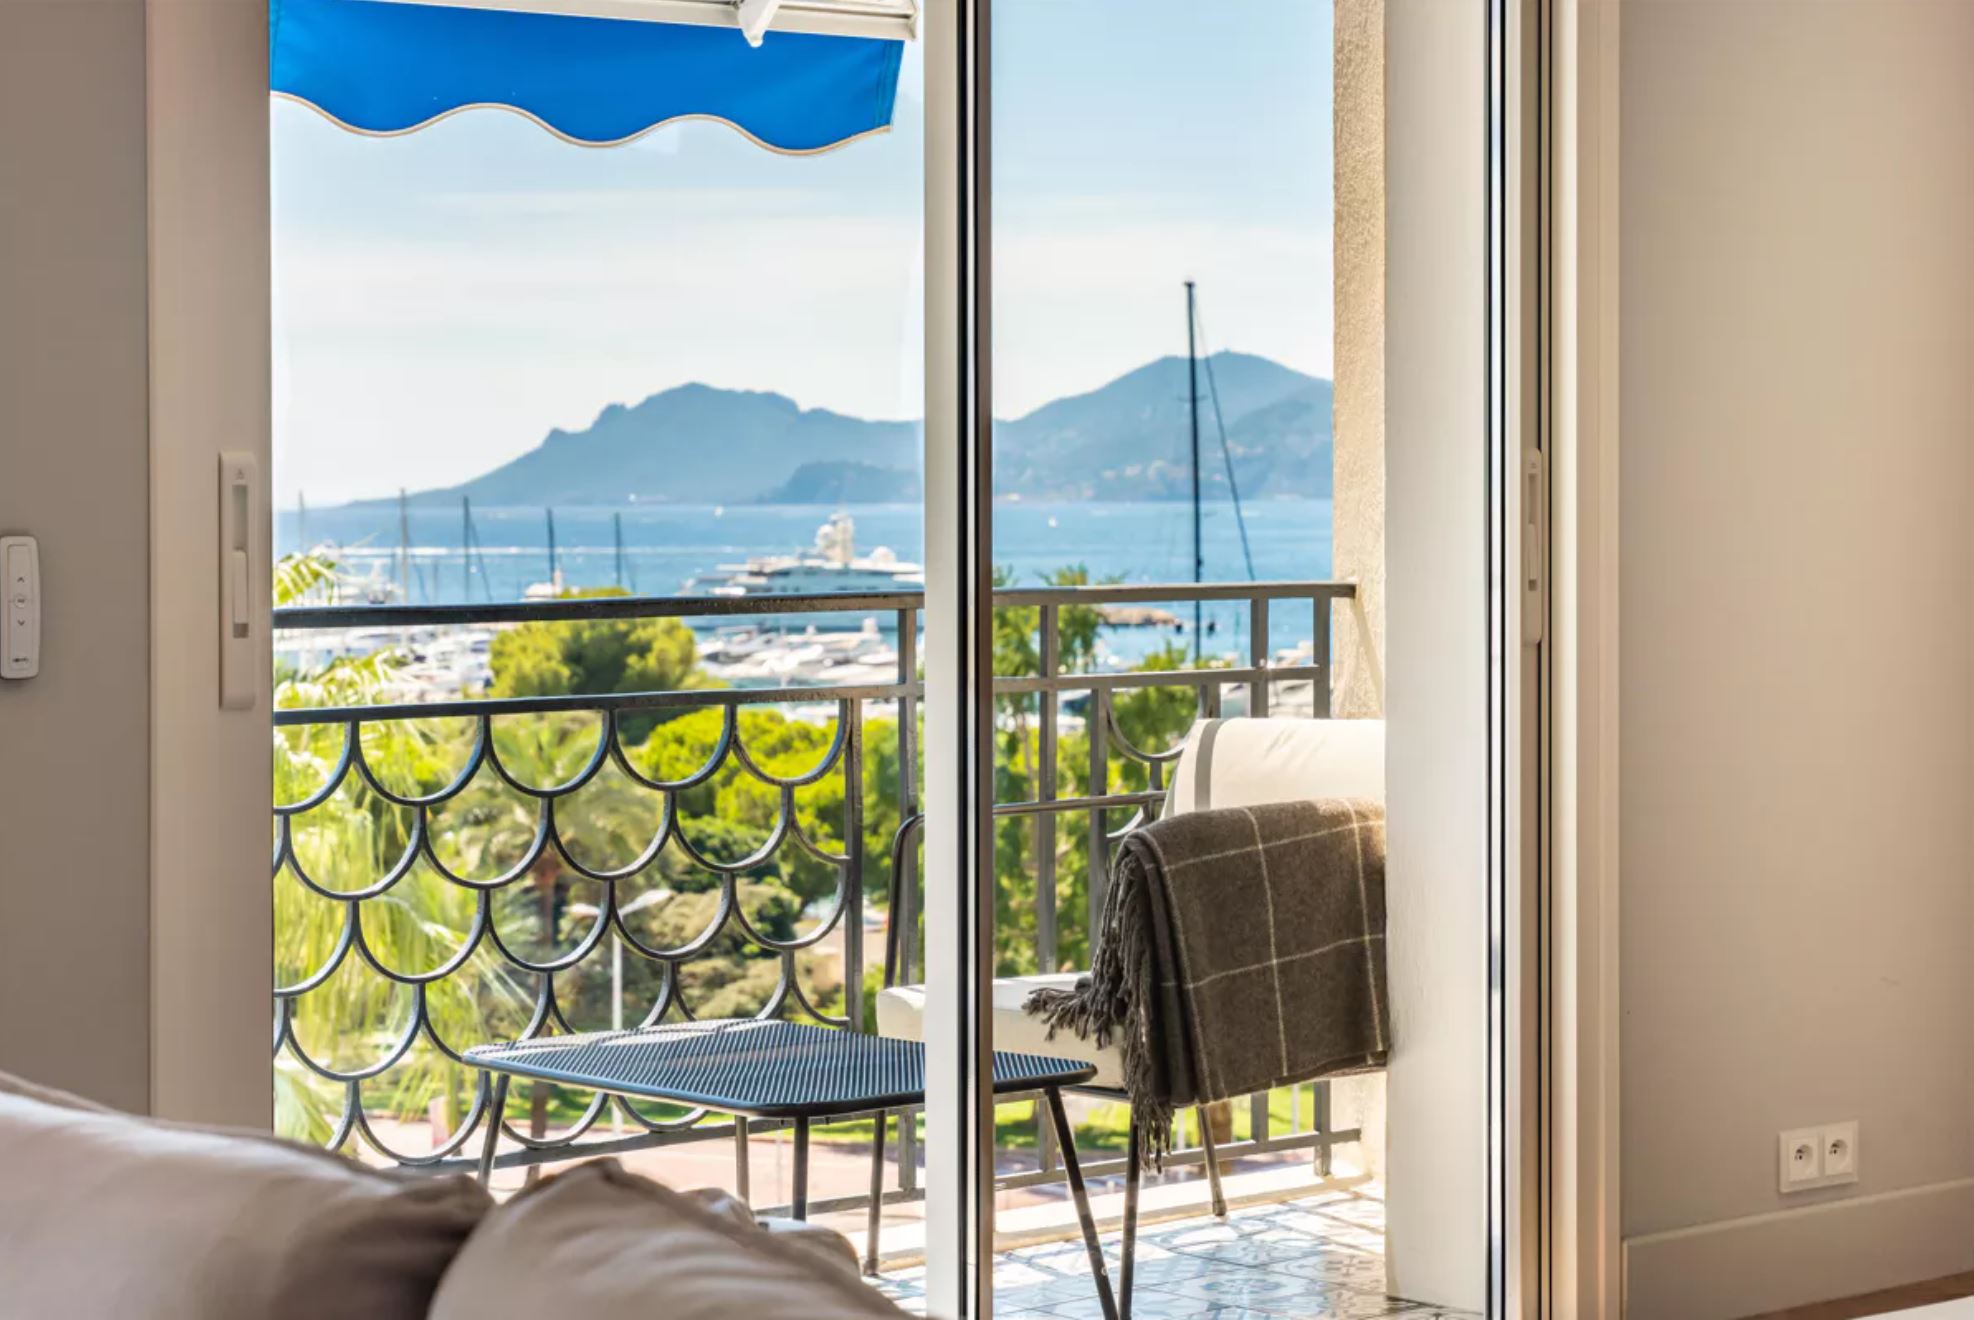 This stunning apartment has a front row seat to Cannes Film Festival's red carpet